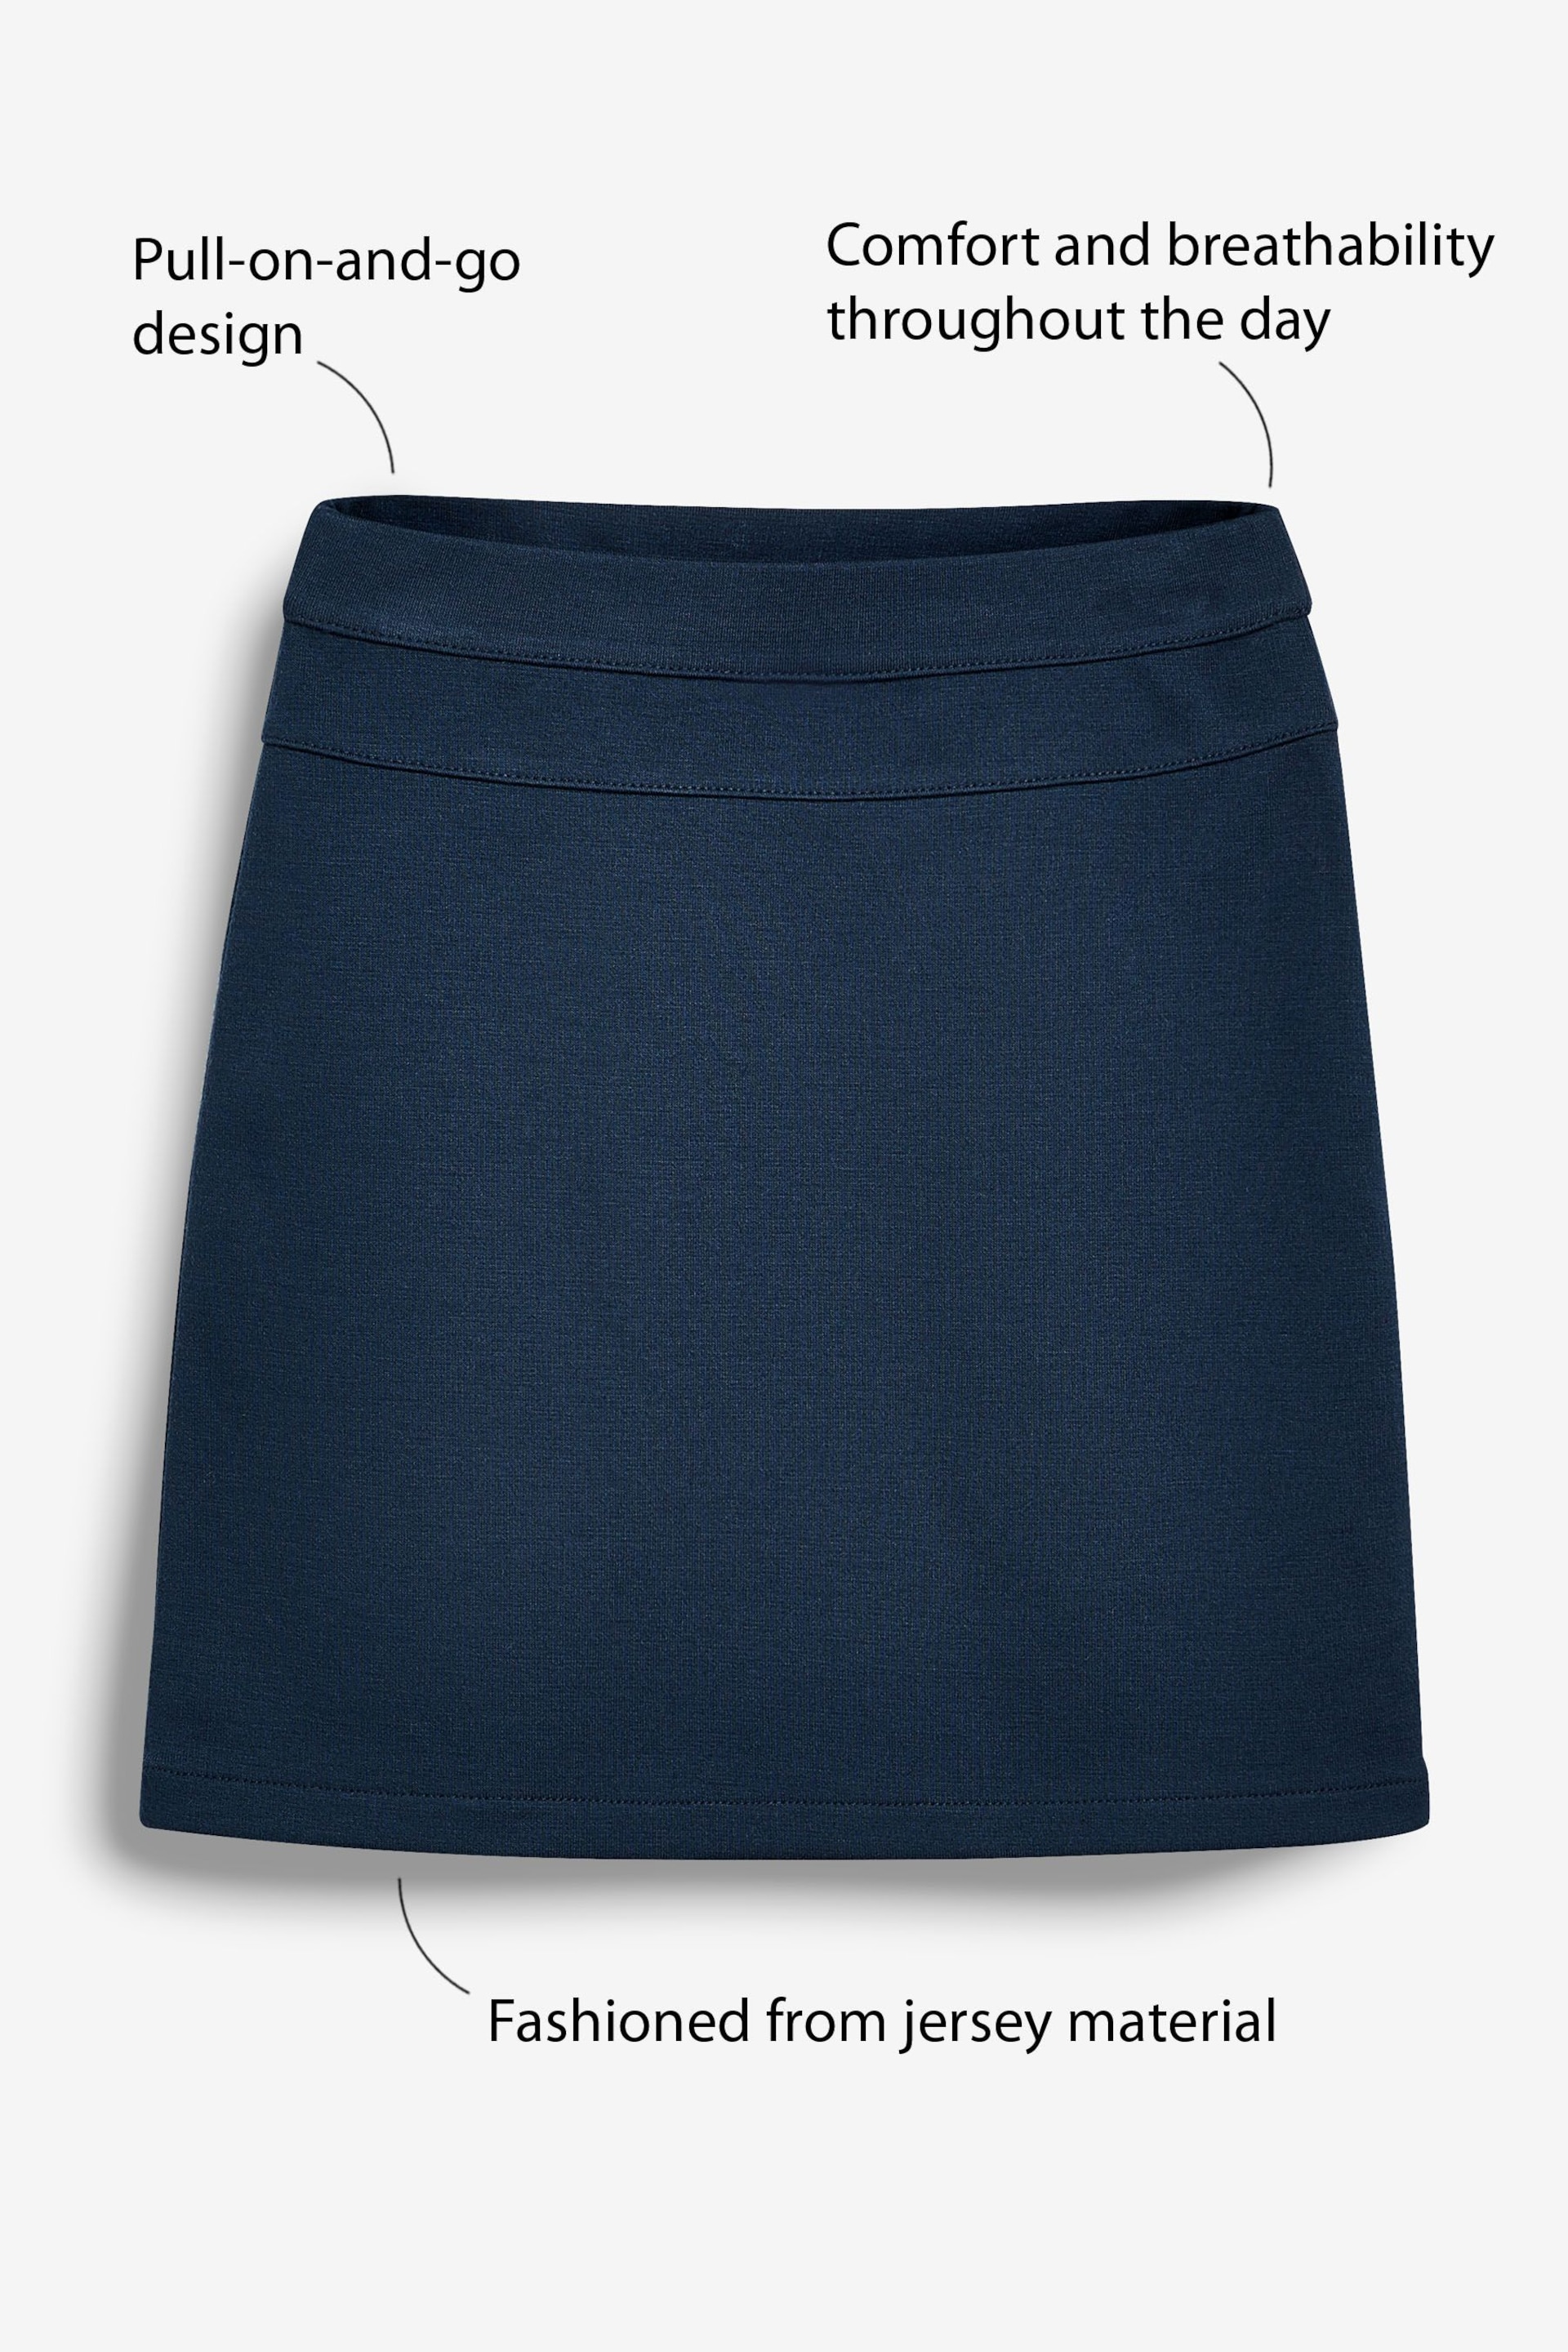 Navy Blue Jersey Stretch Pull-On Pencil Skirt (3-18yrs) - Image 4 of 7